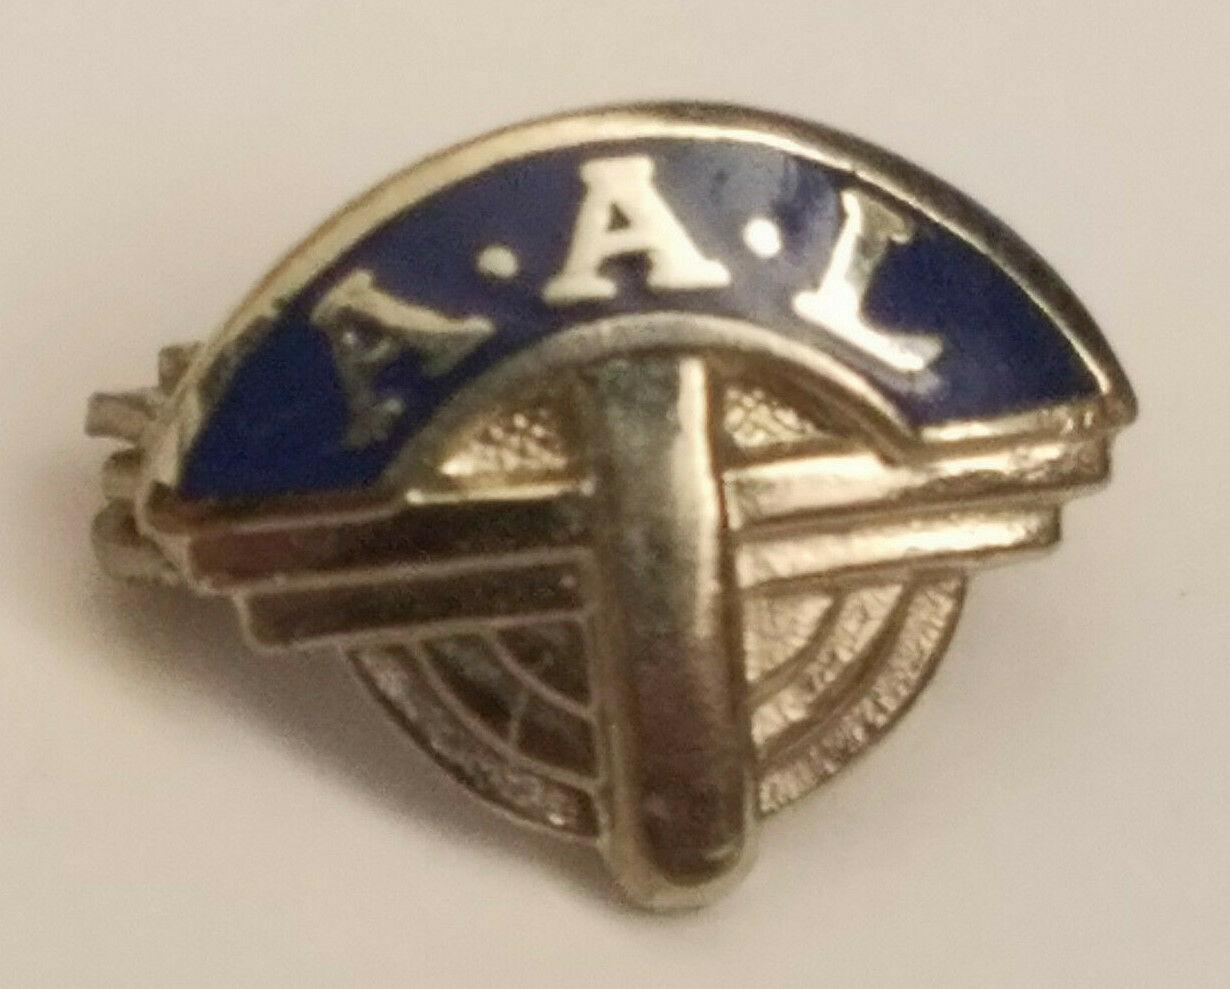 Vintage Aal Aid Association For Lutherans Life Insurance Enamel Lapel Pin